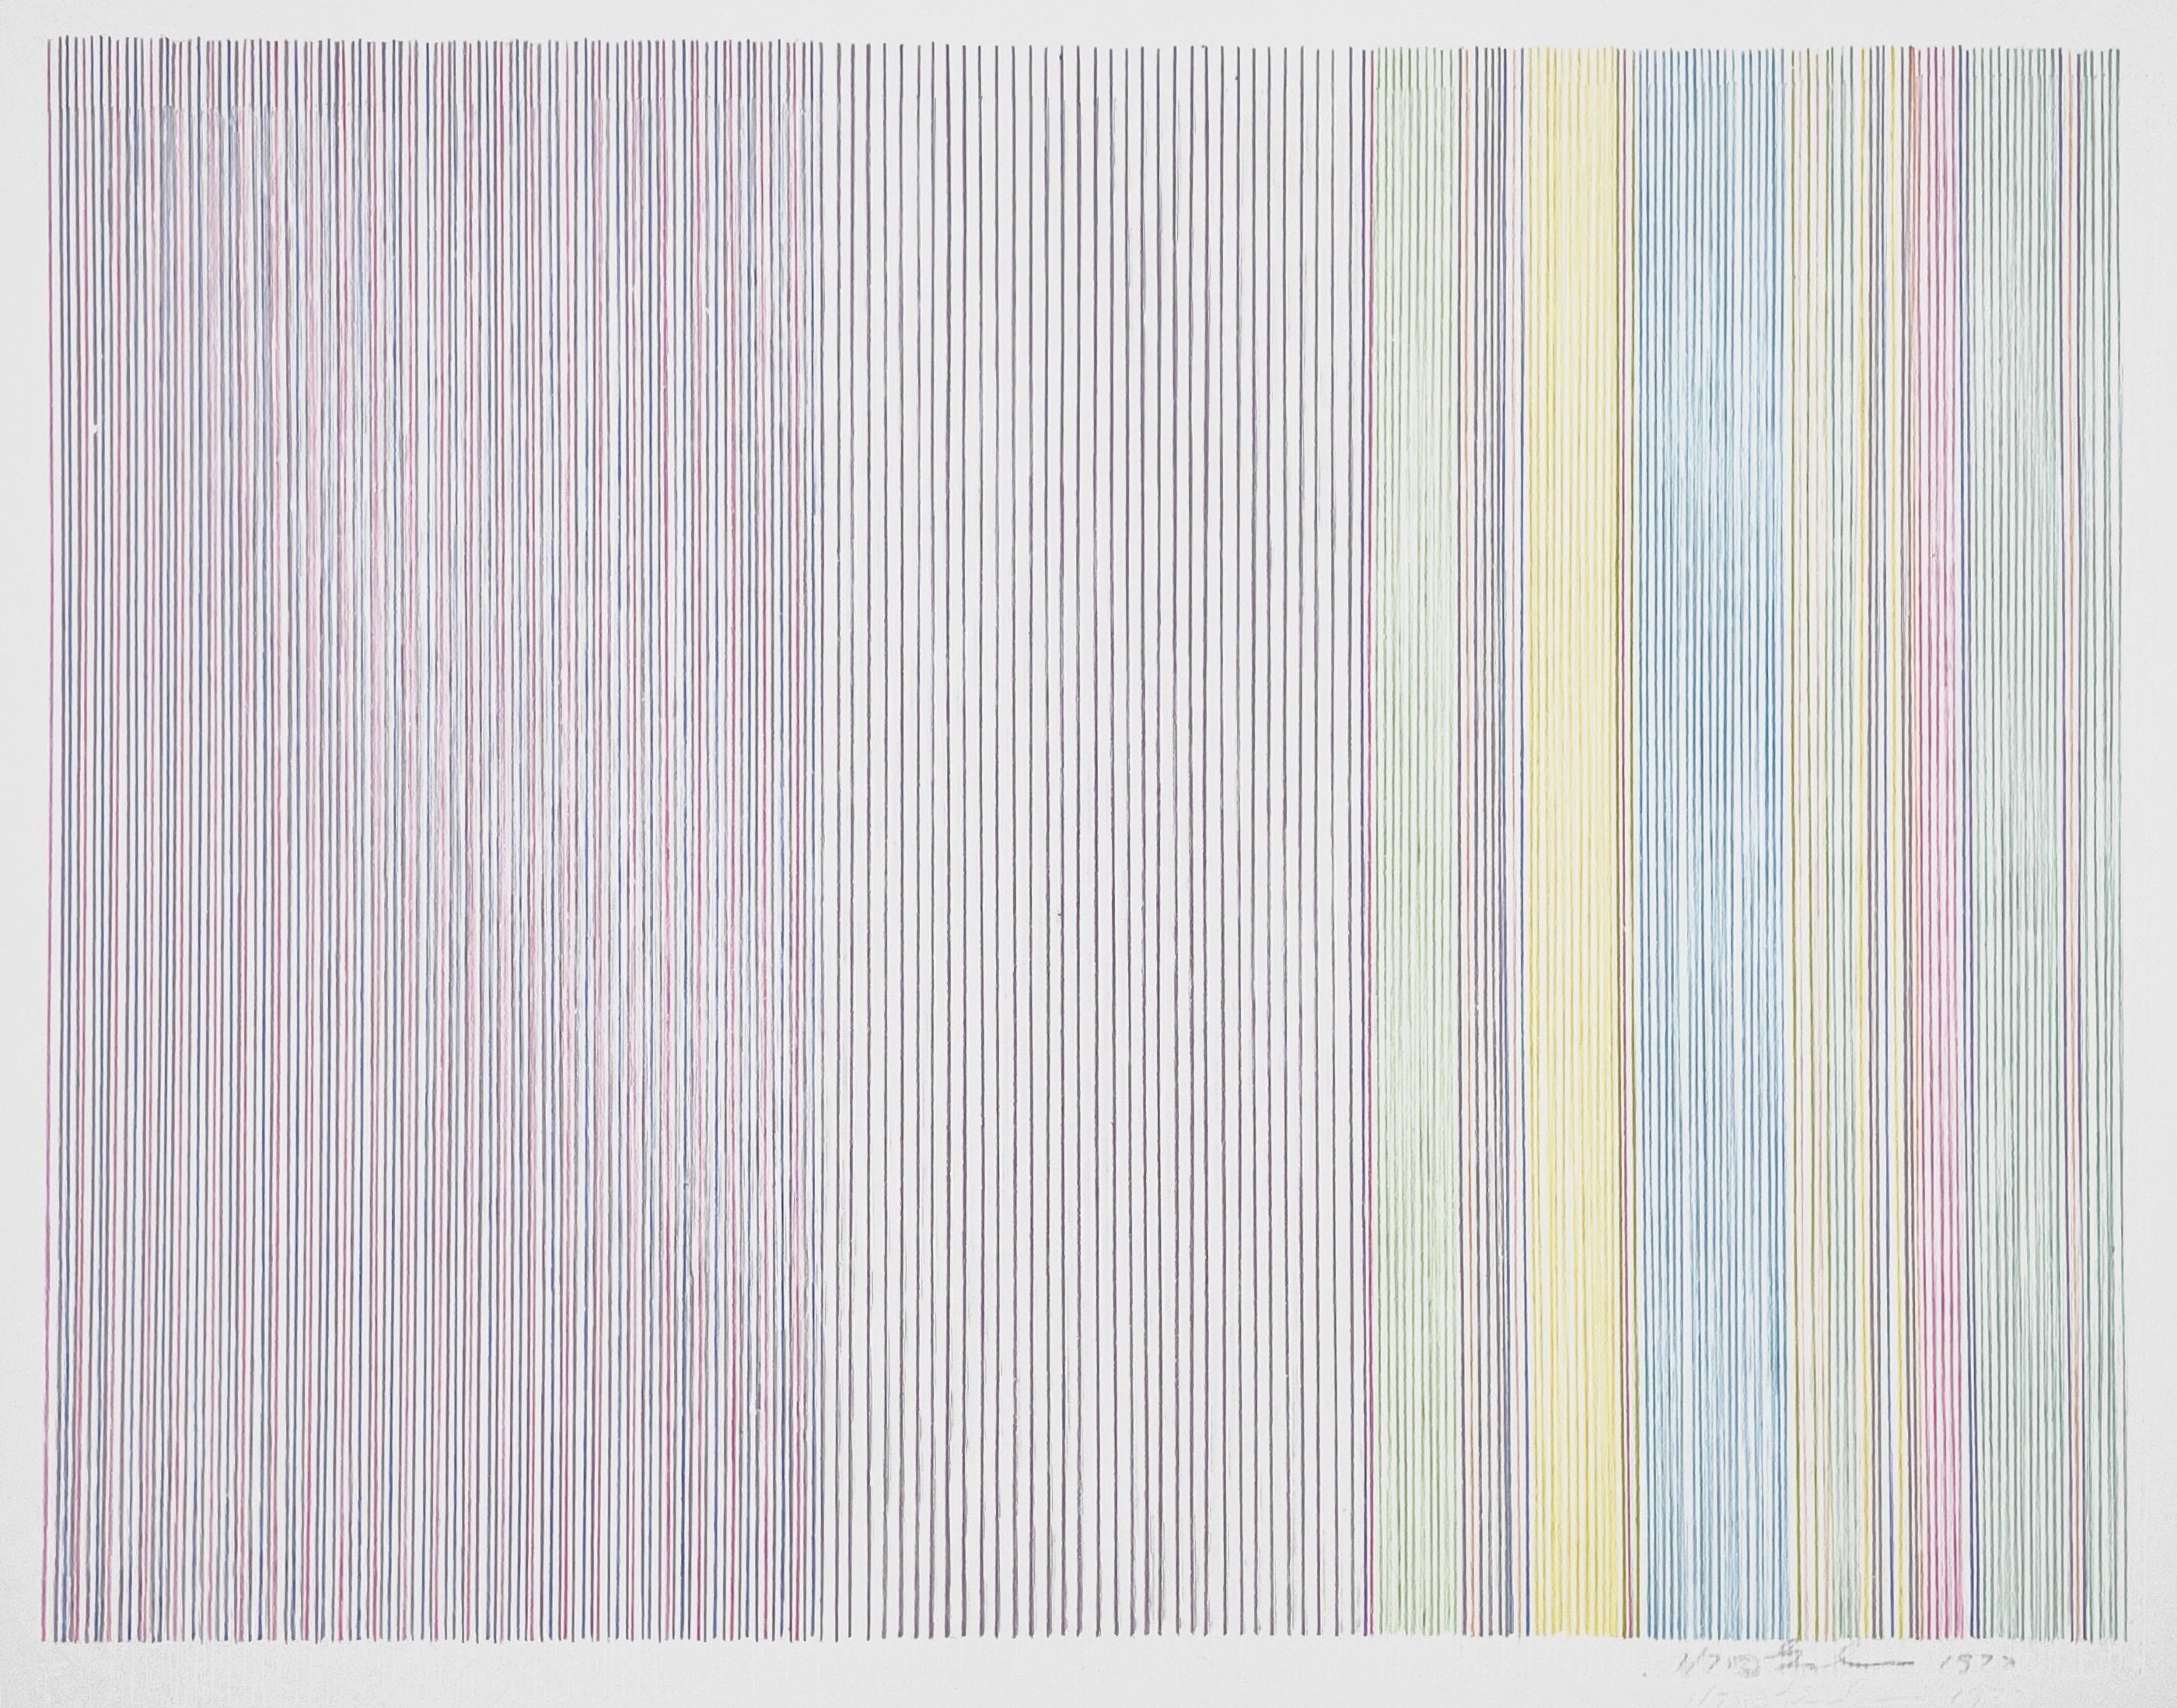 Rainbow shades shine in this abstract, color field print. Vibrant red, yellow, orange, purple, and green lines take on the organic quality of handmade paper, resulting in this subtle iteration of Gene Davis’ iconic color field stripe paintings.